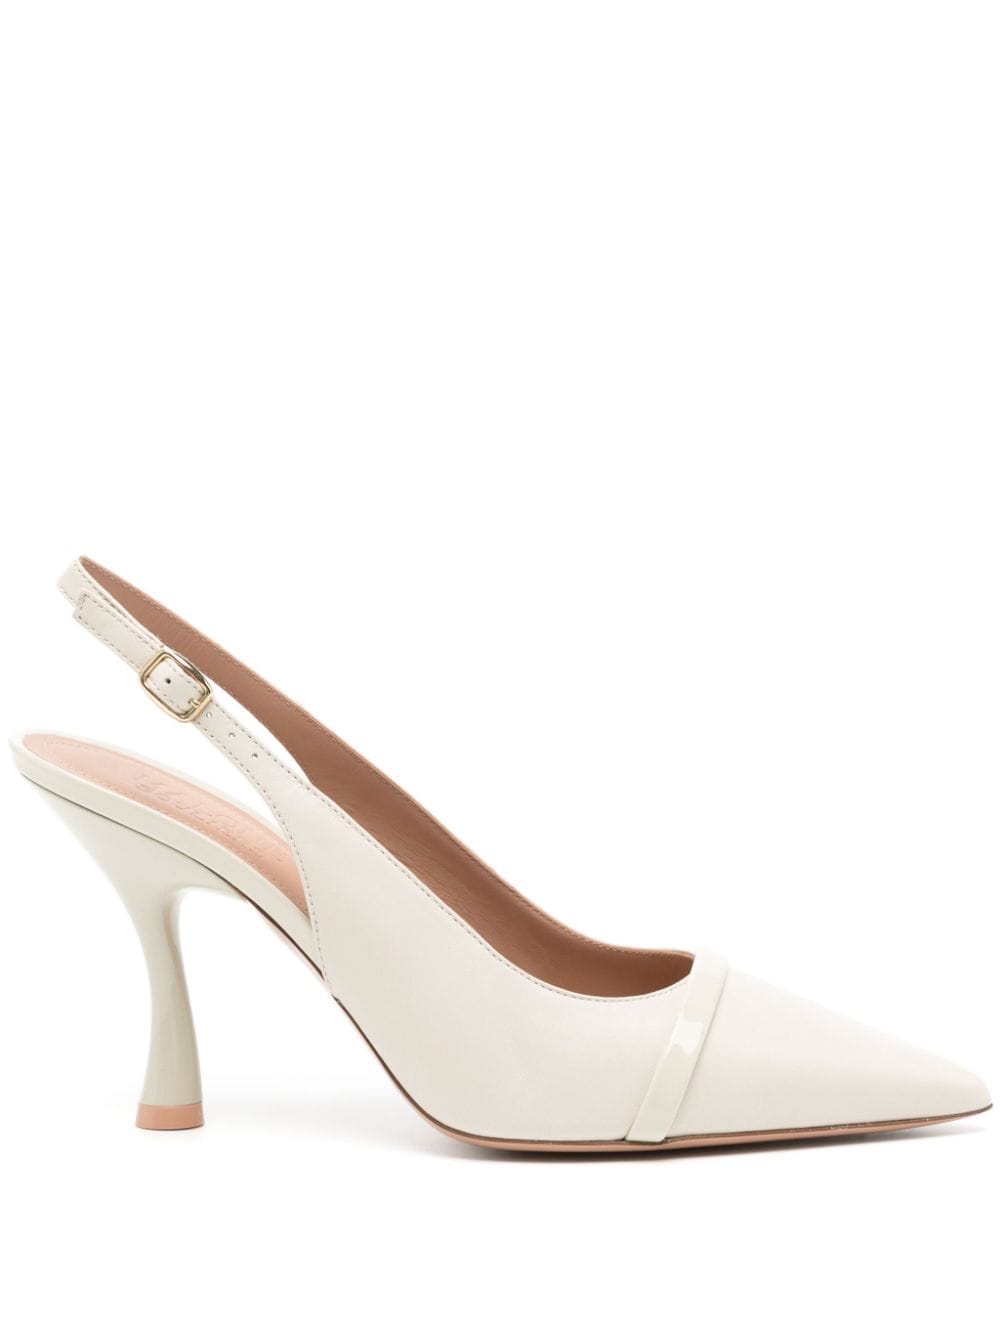 Malone Souliers Marion Pumps 85mm - Nude von Malone Souliers